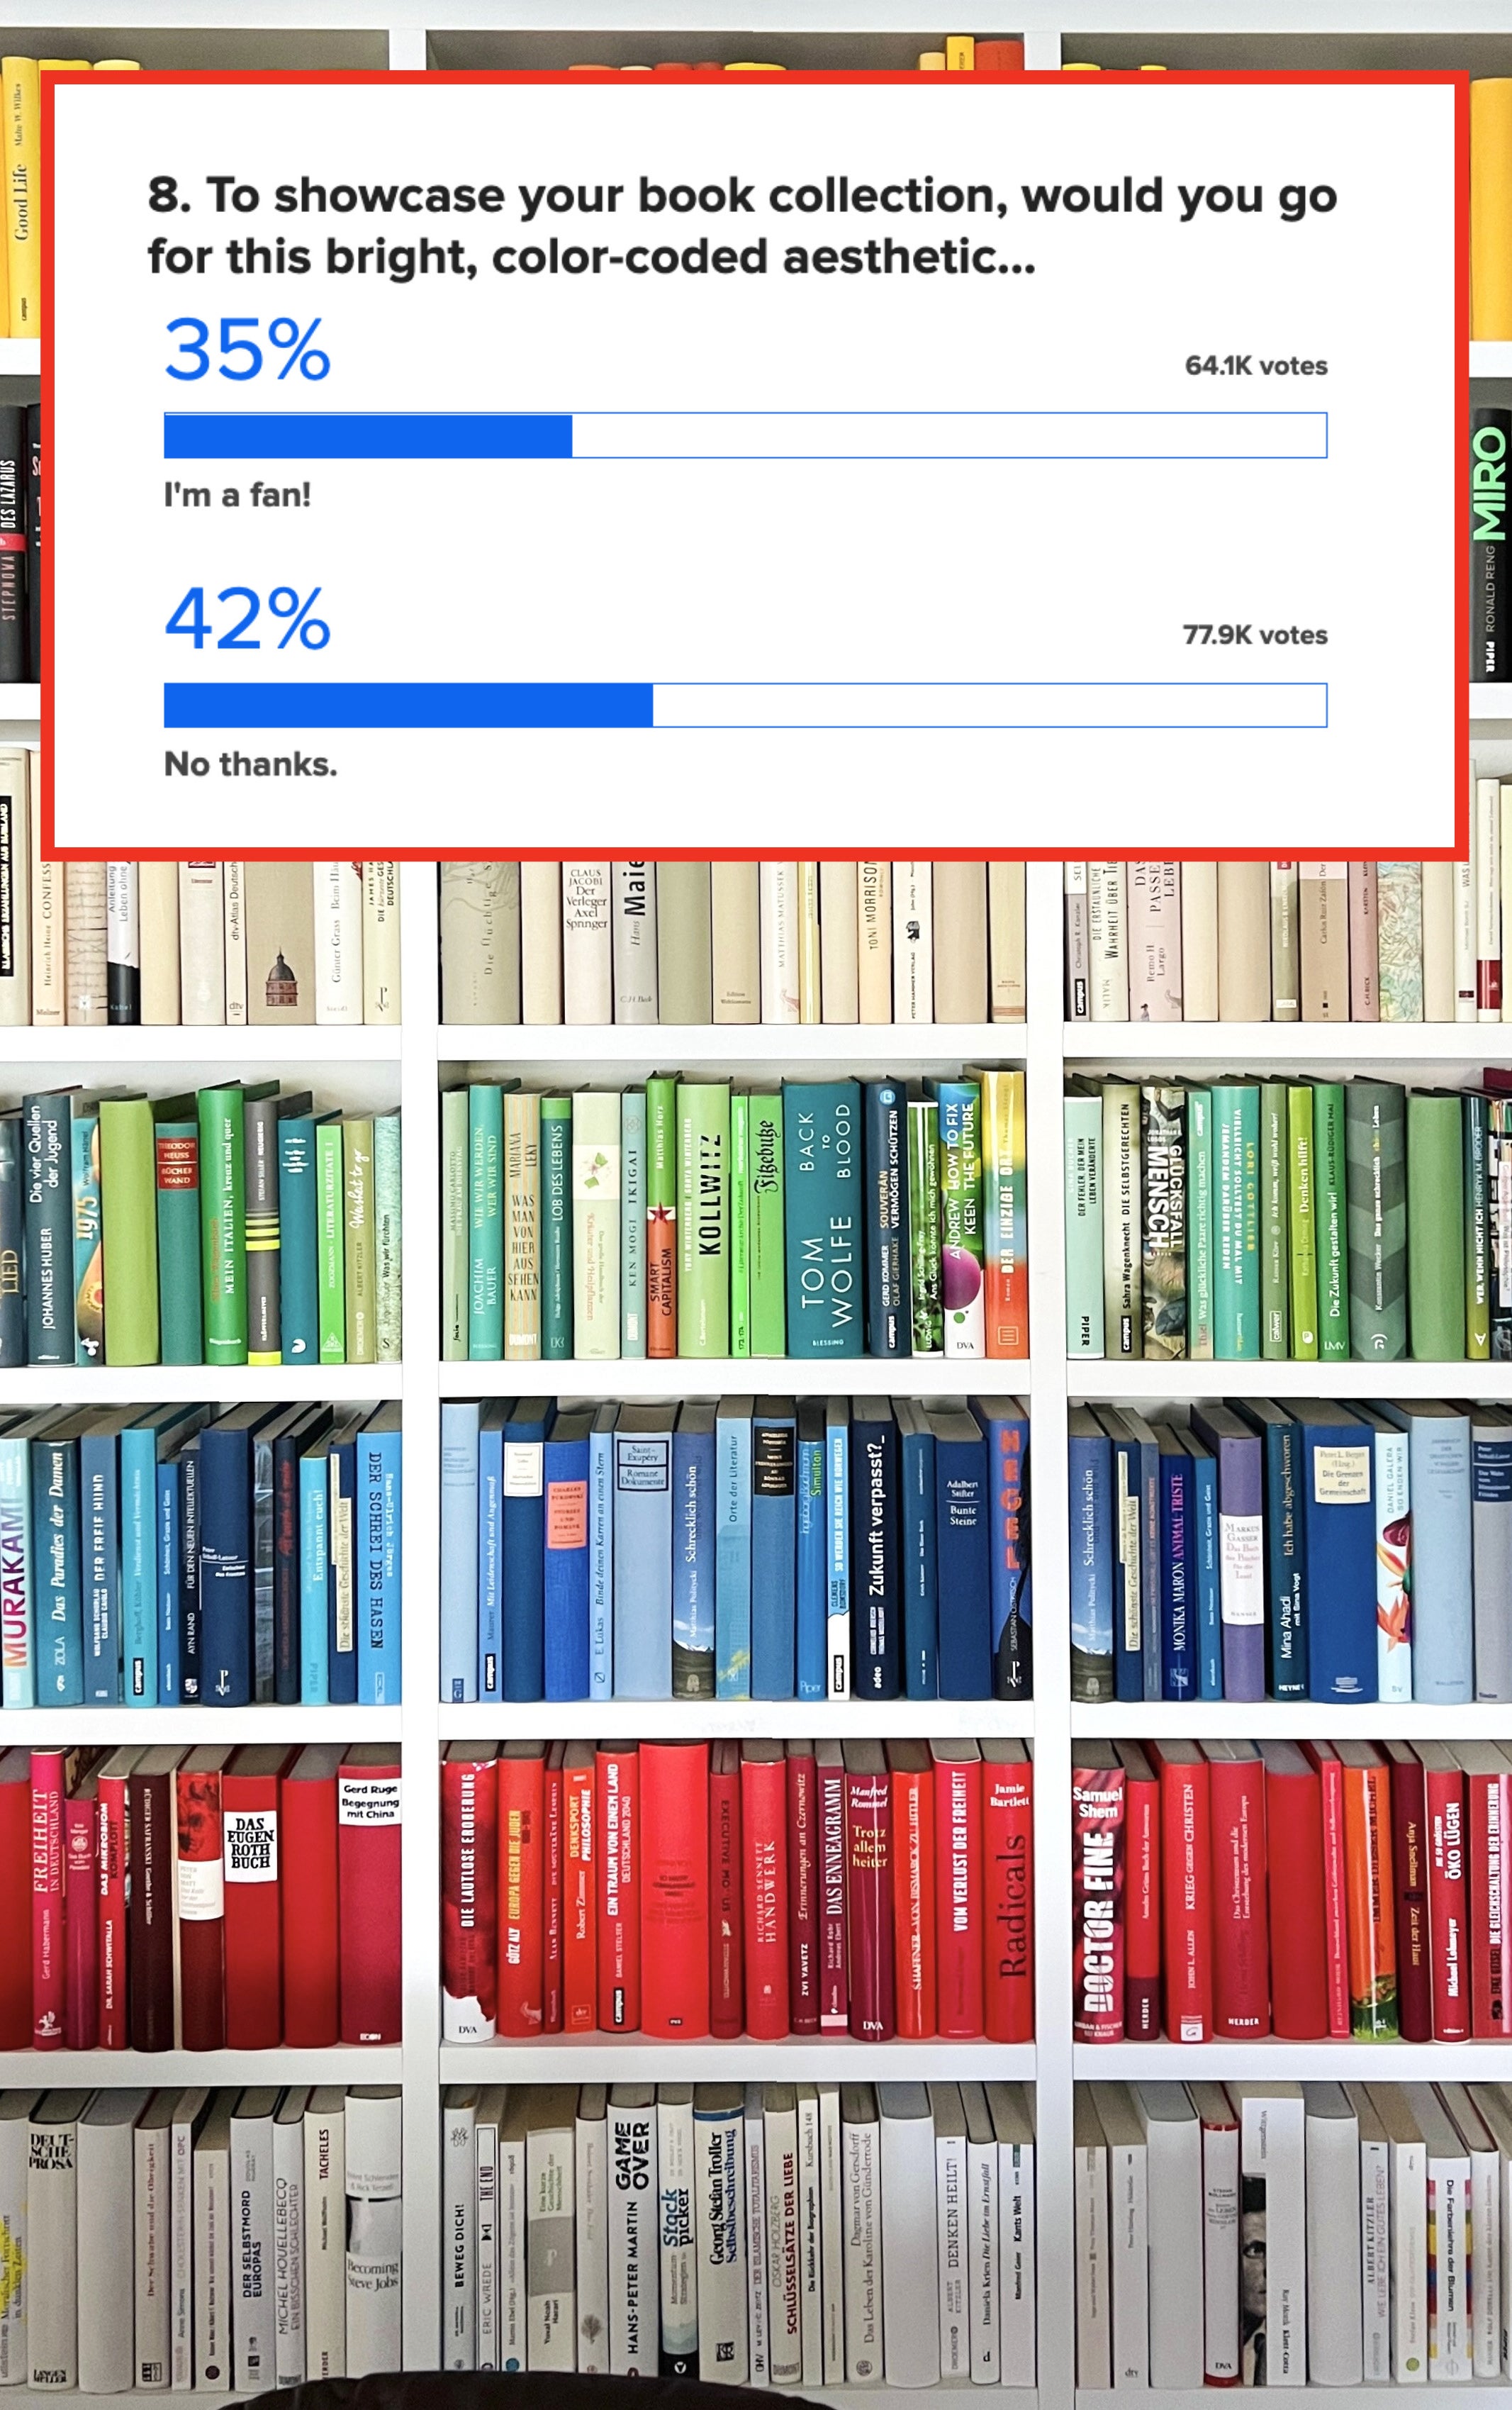 35% like color-coded bookshelves and 42% don&#x27;t